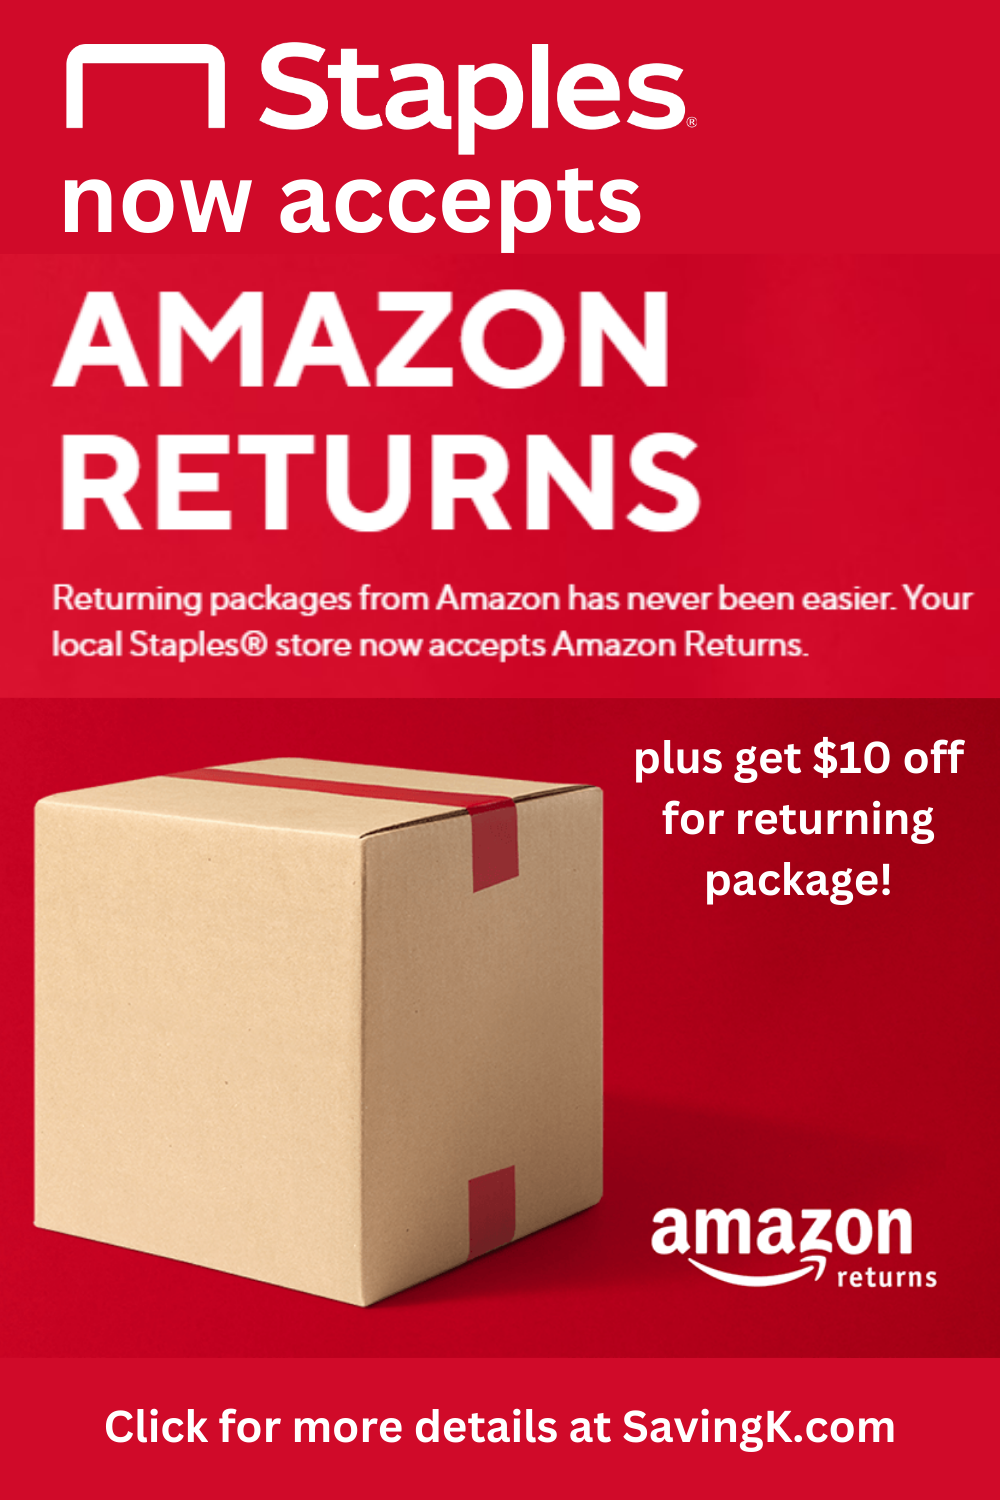 Staples now accepts Amazon Returns. Here's how it works